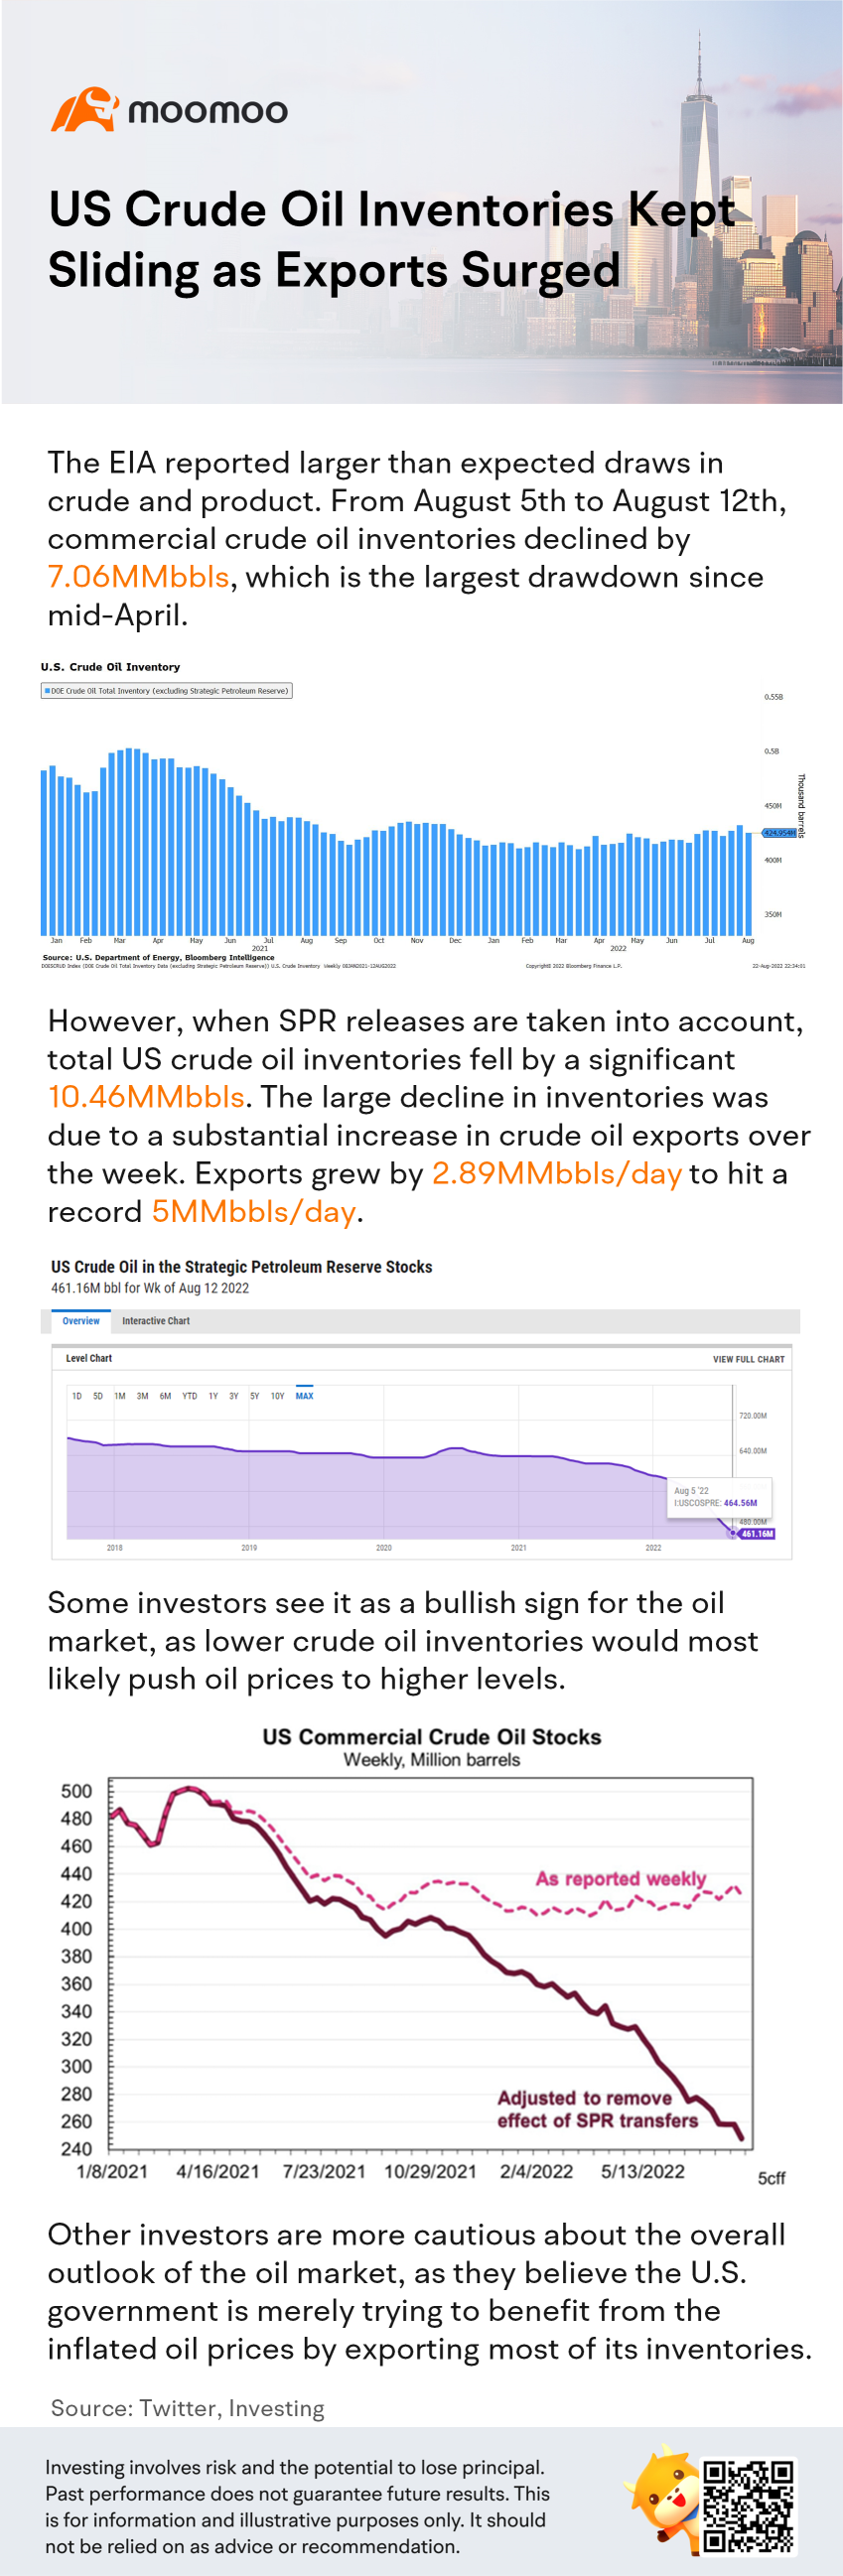 US Crude Oil Inventories Kept Sliding as Exports Surged